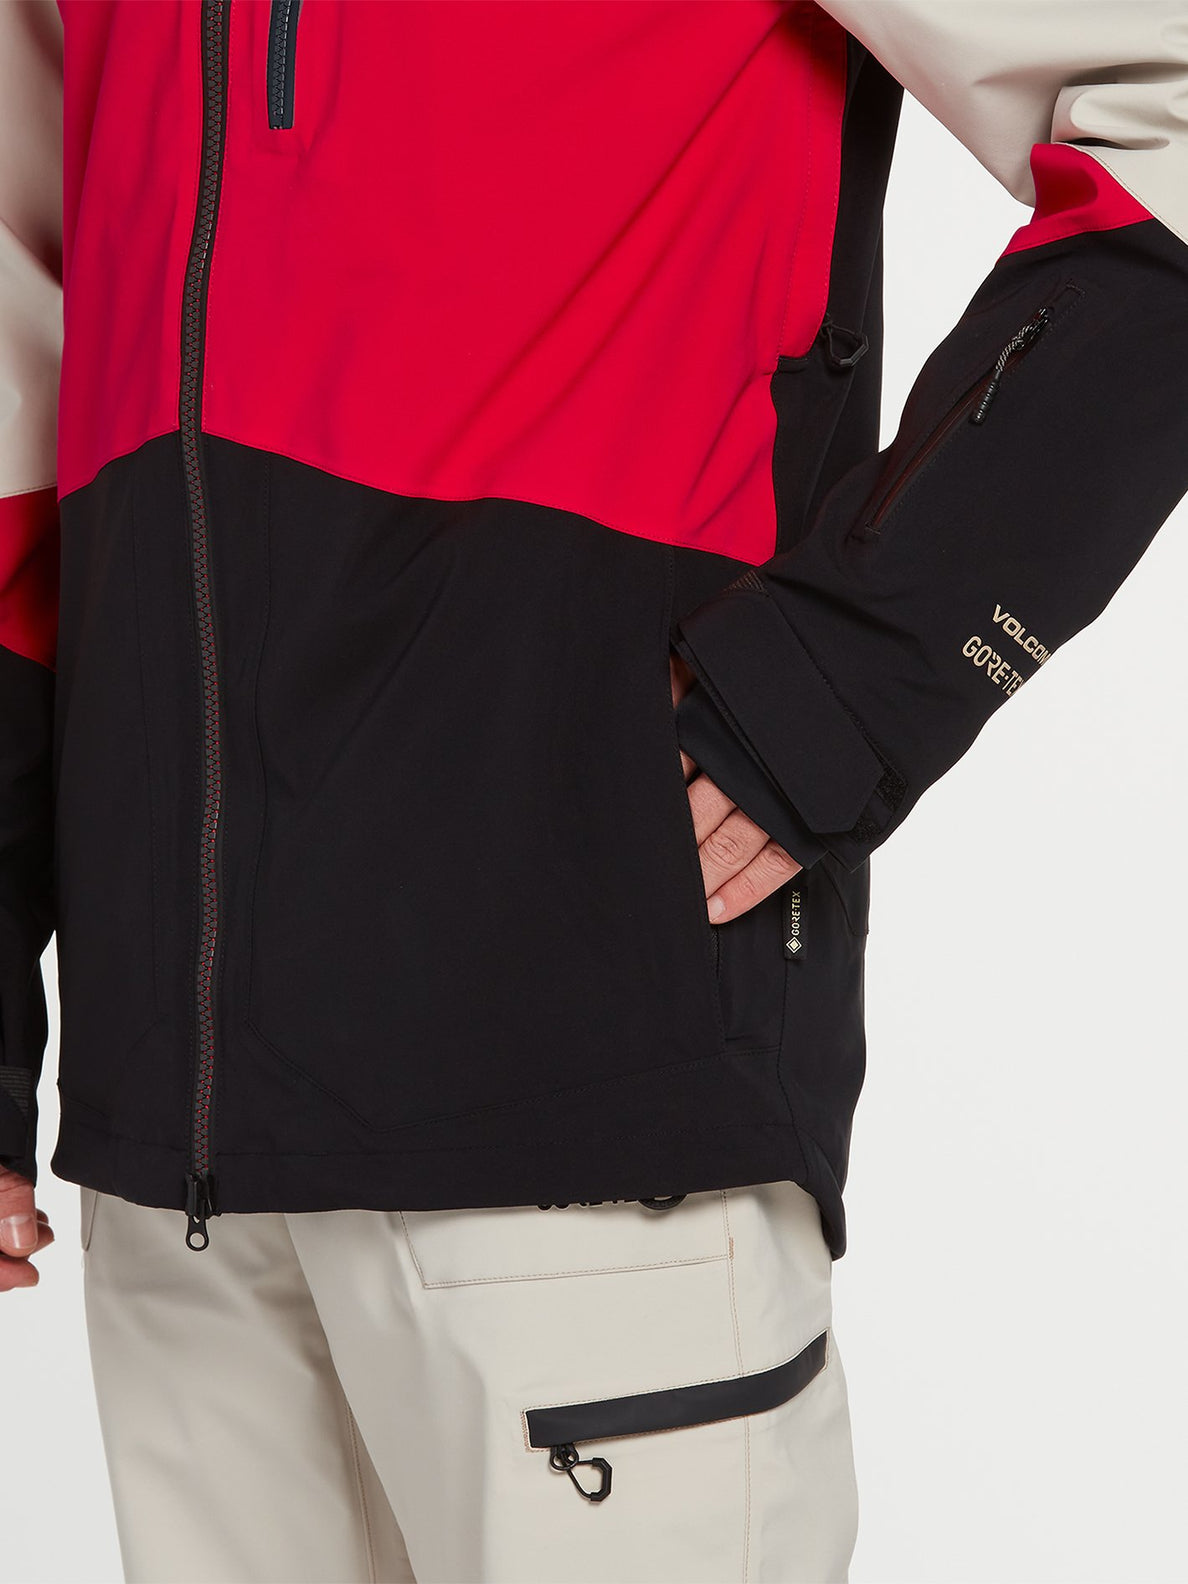 Bl Stretch Gore-Tex Jacket - RED (G0652205_RED) [35]